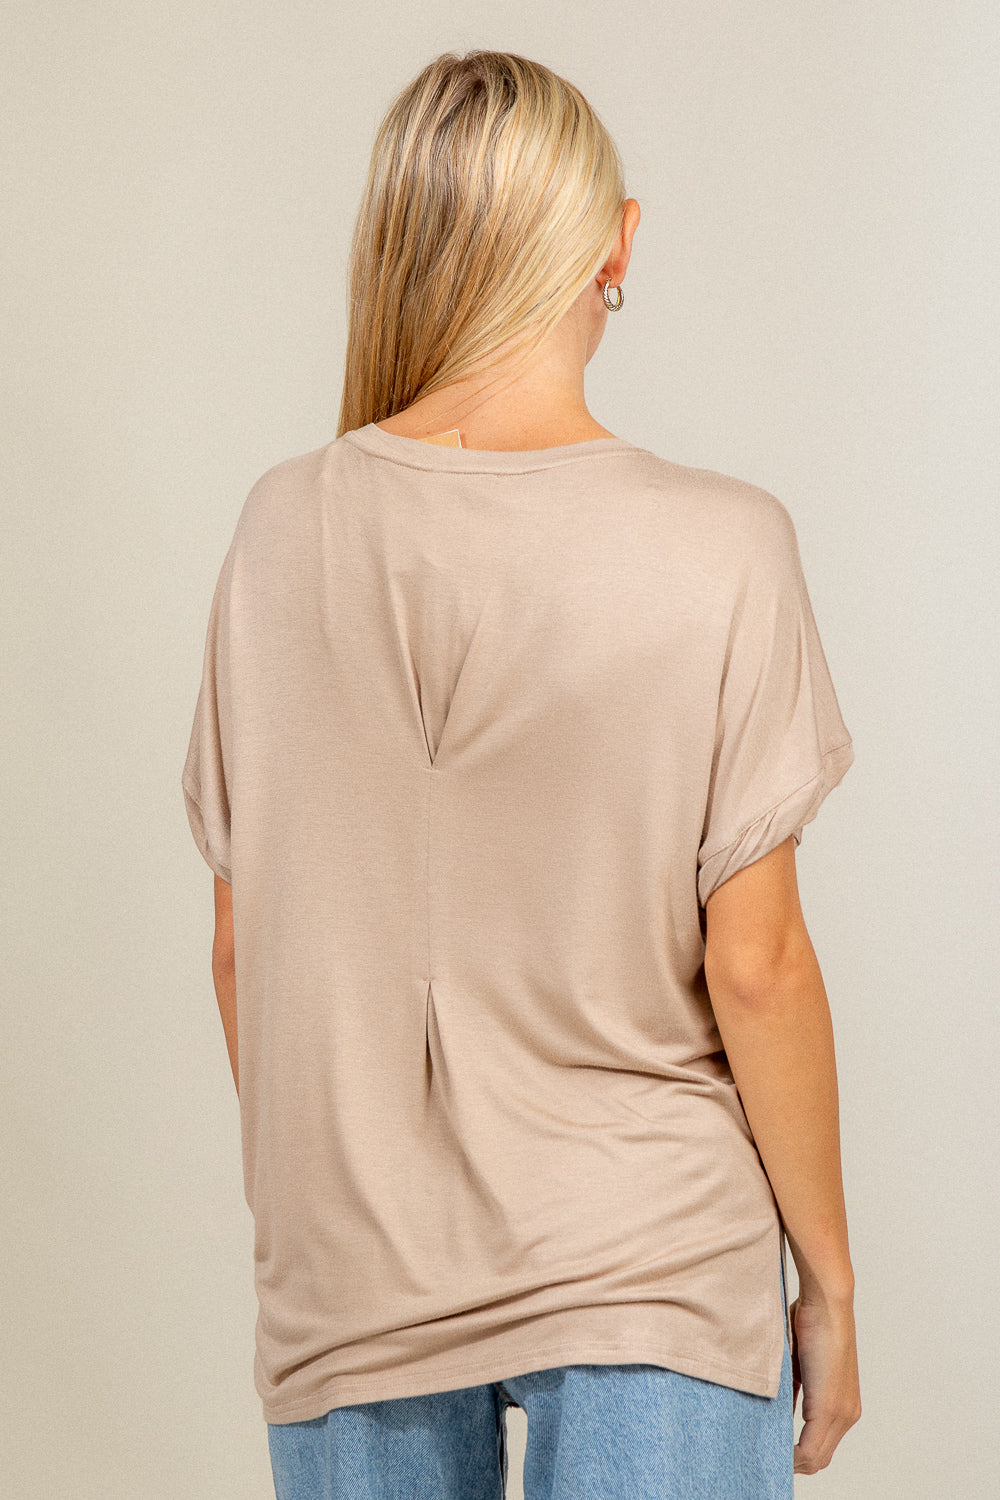 Take My Hand Top - Taupe